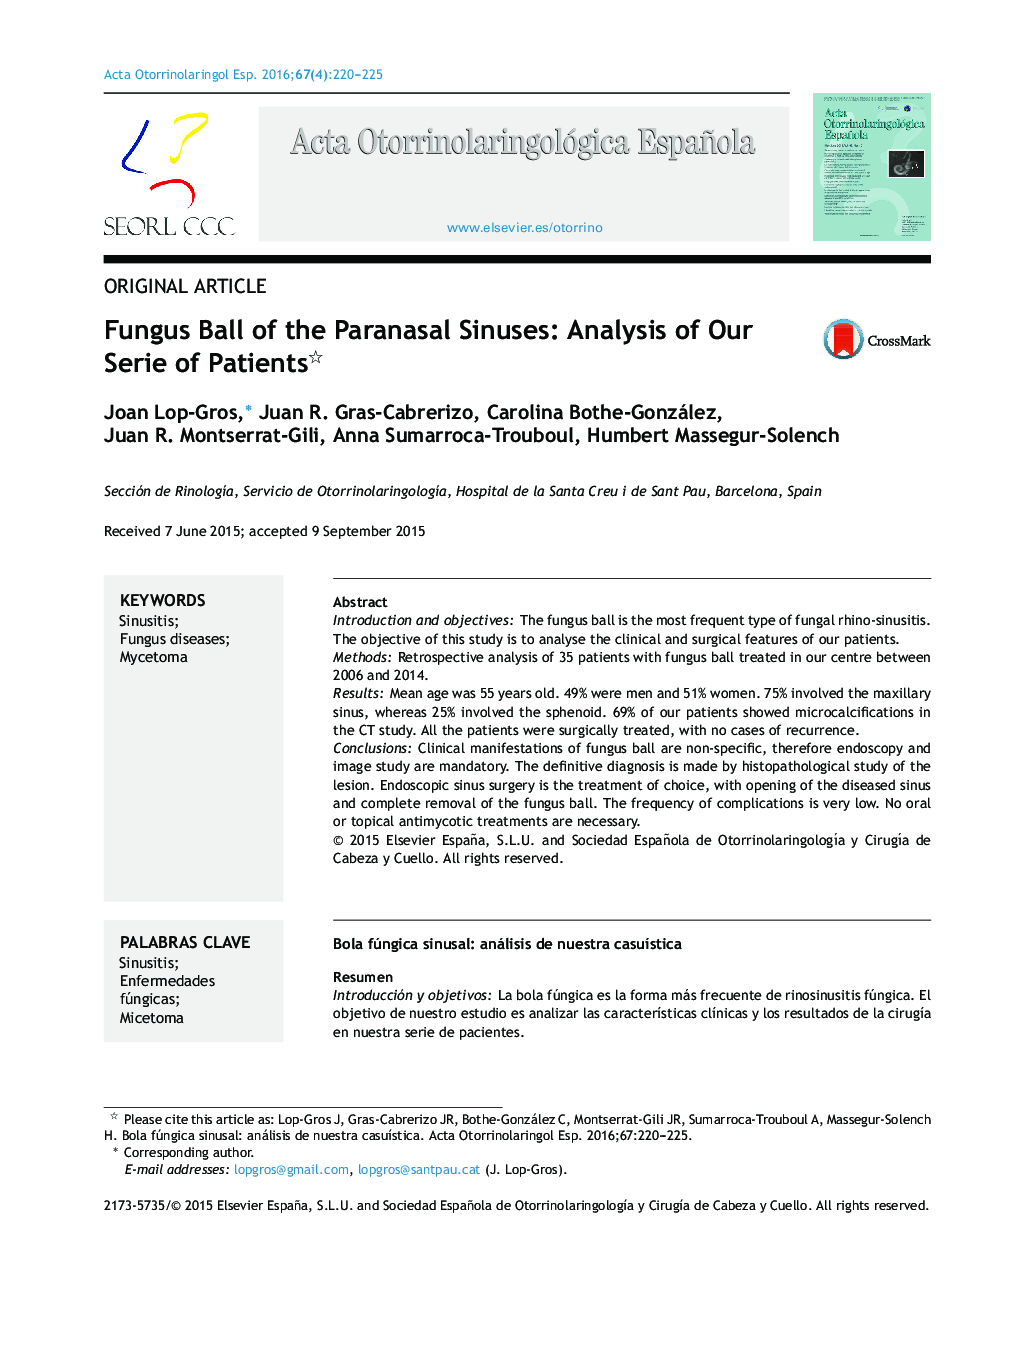 Fungus Ball of the Paranasal Sinuses: Analysis of Our Serie of Patients 